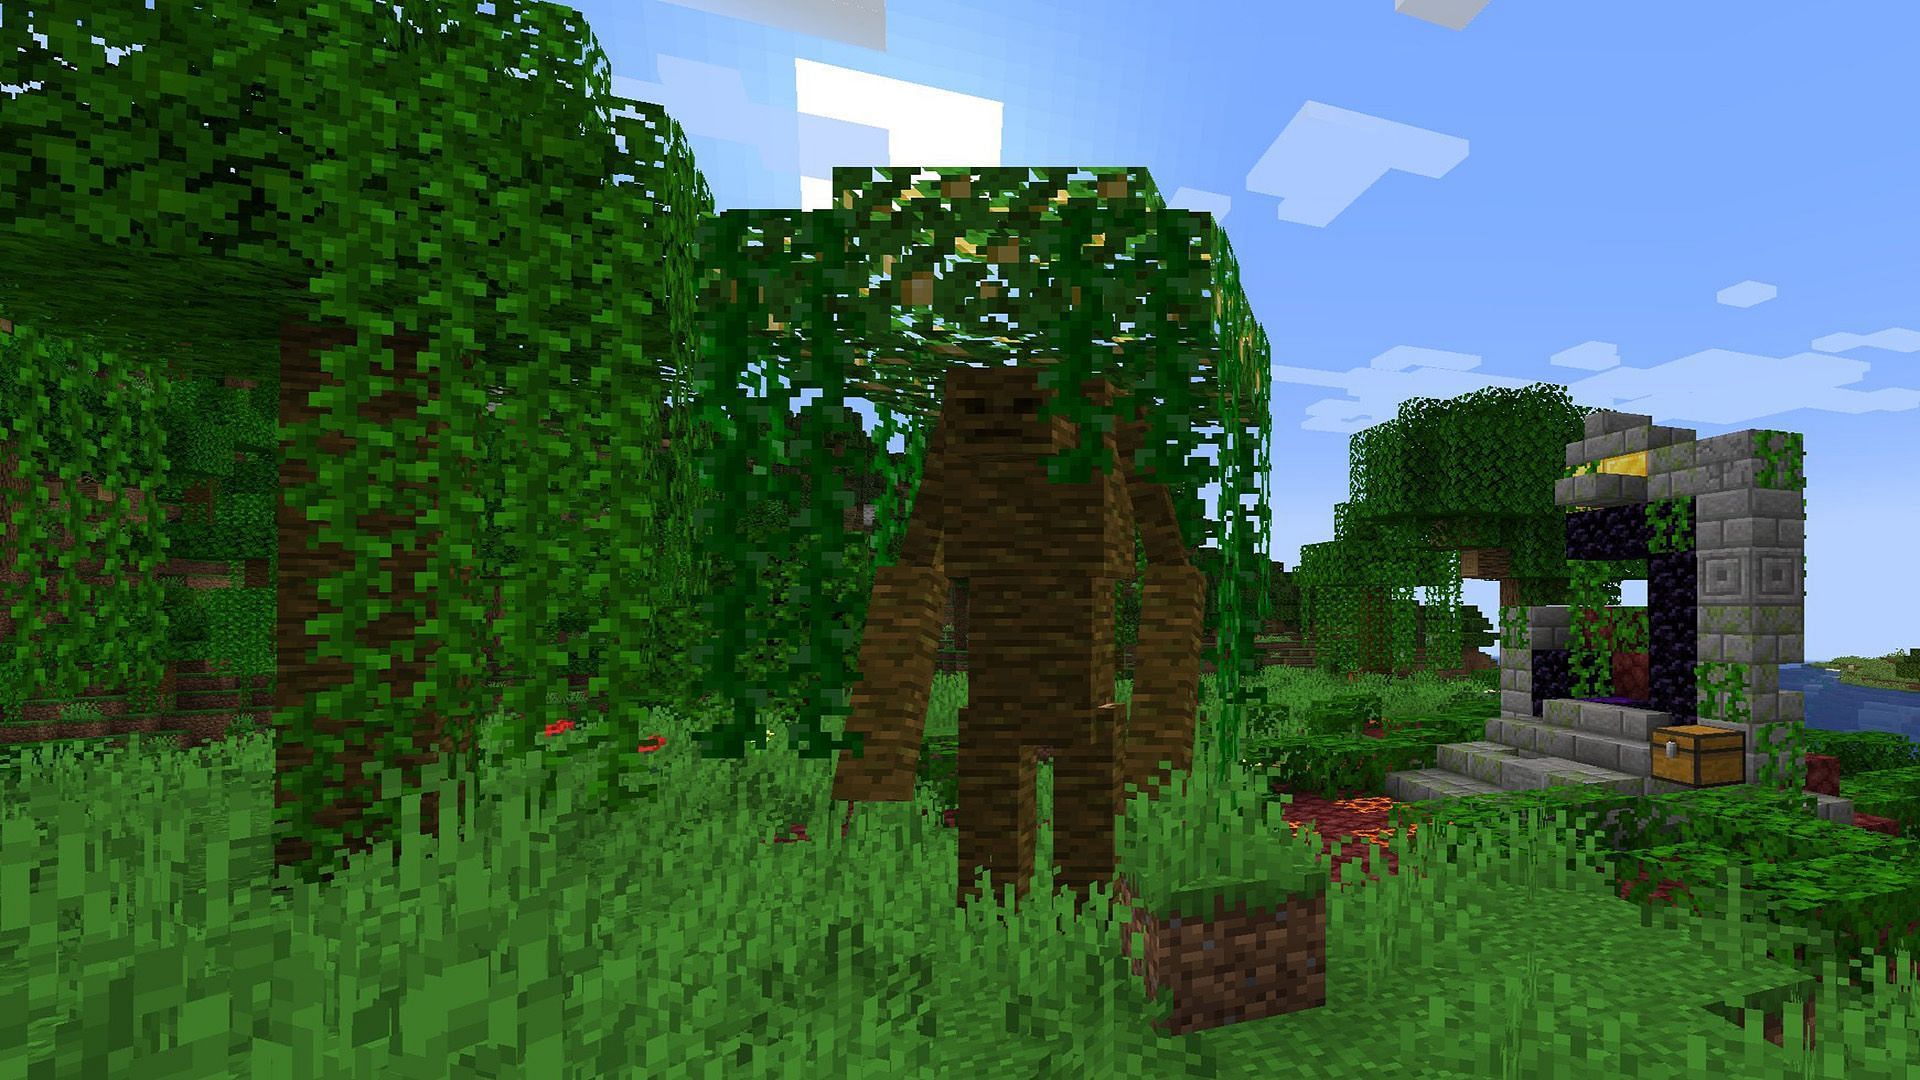 Walking mobs that love trees and look like them (Image via curseforge.com)